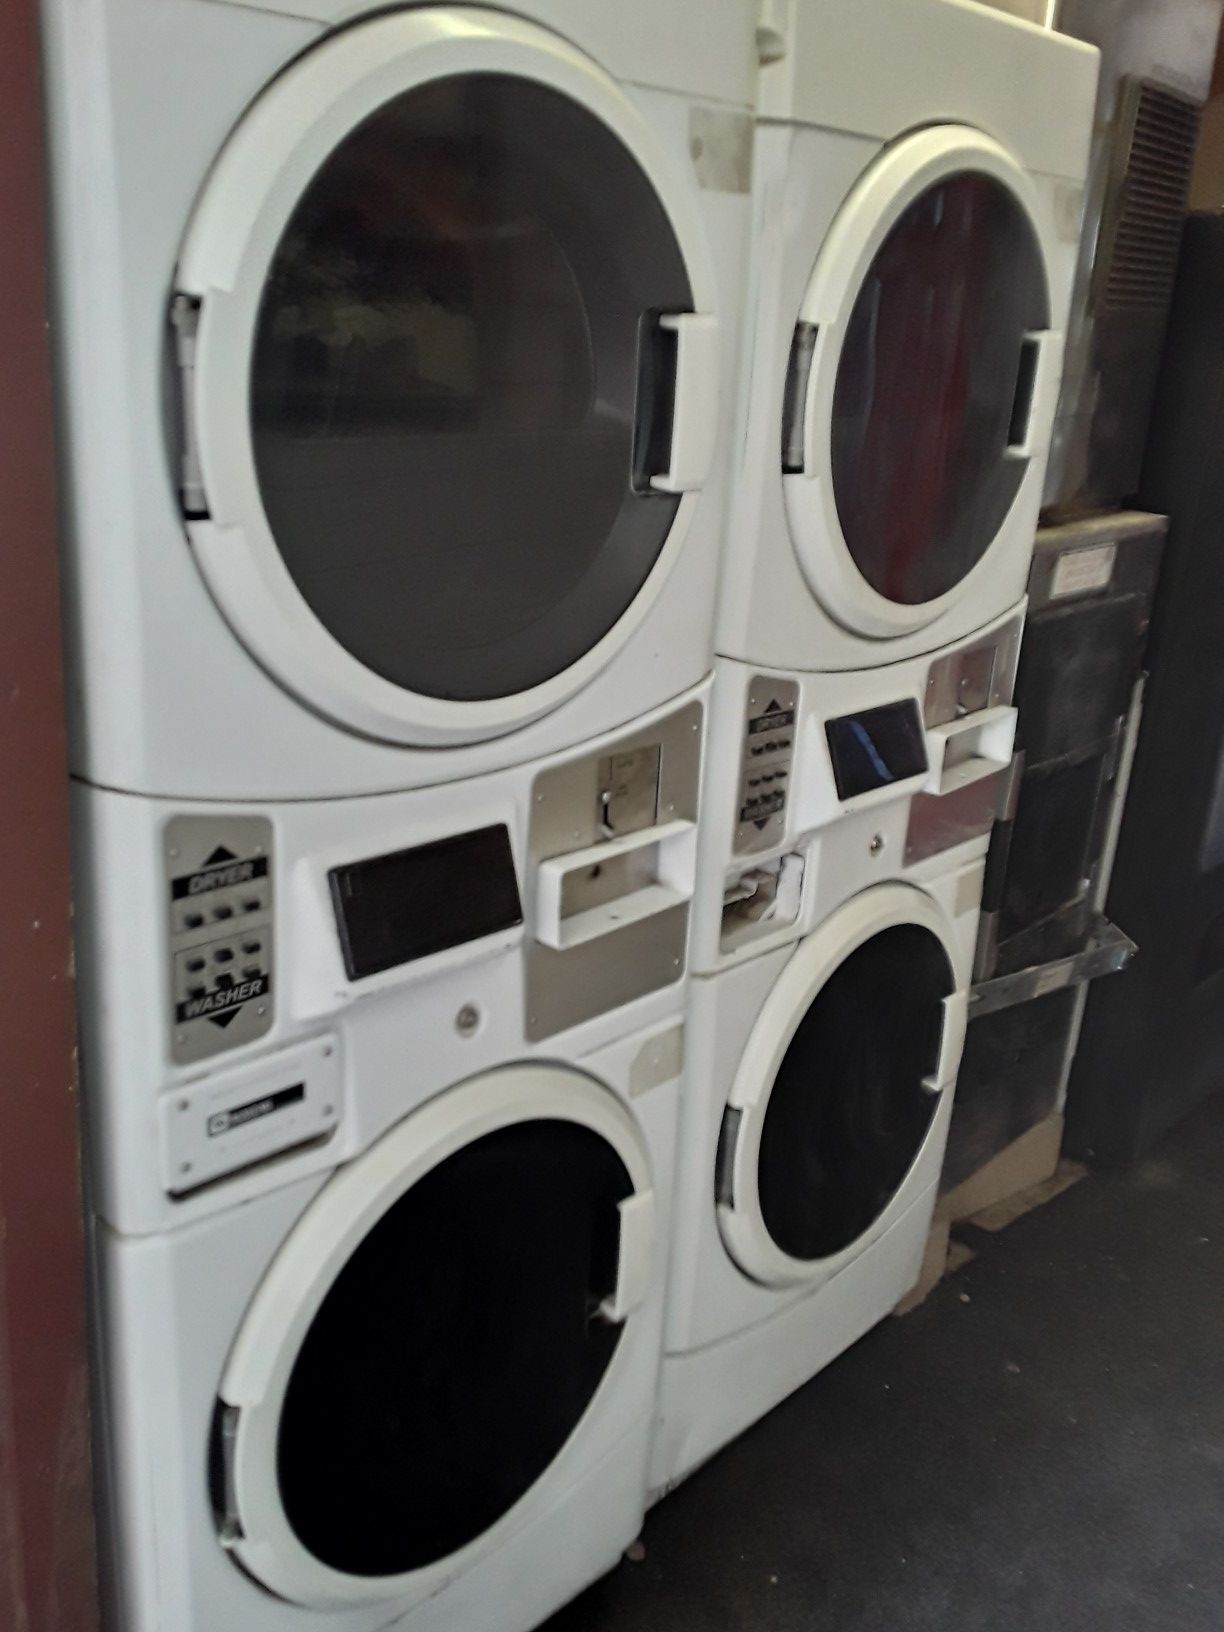 Maytag stacked washer and dryer 2 sets great for business or home separate each set is 260 or for both 475